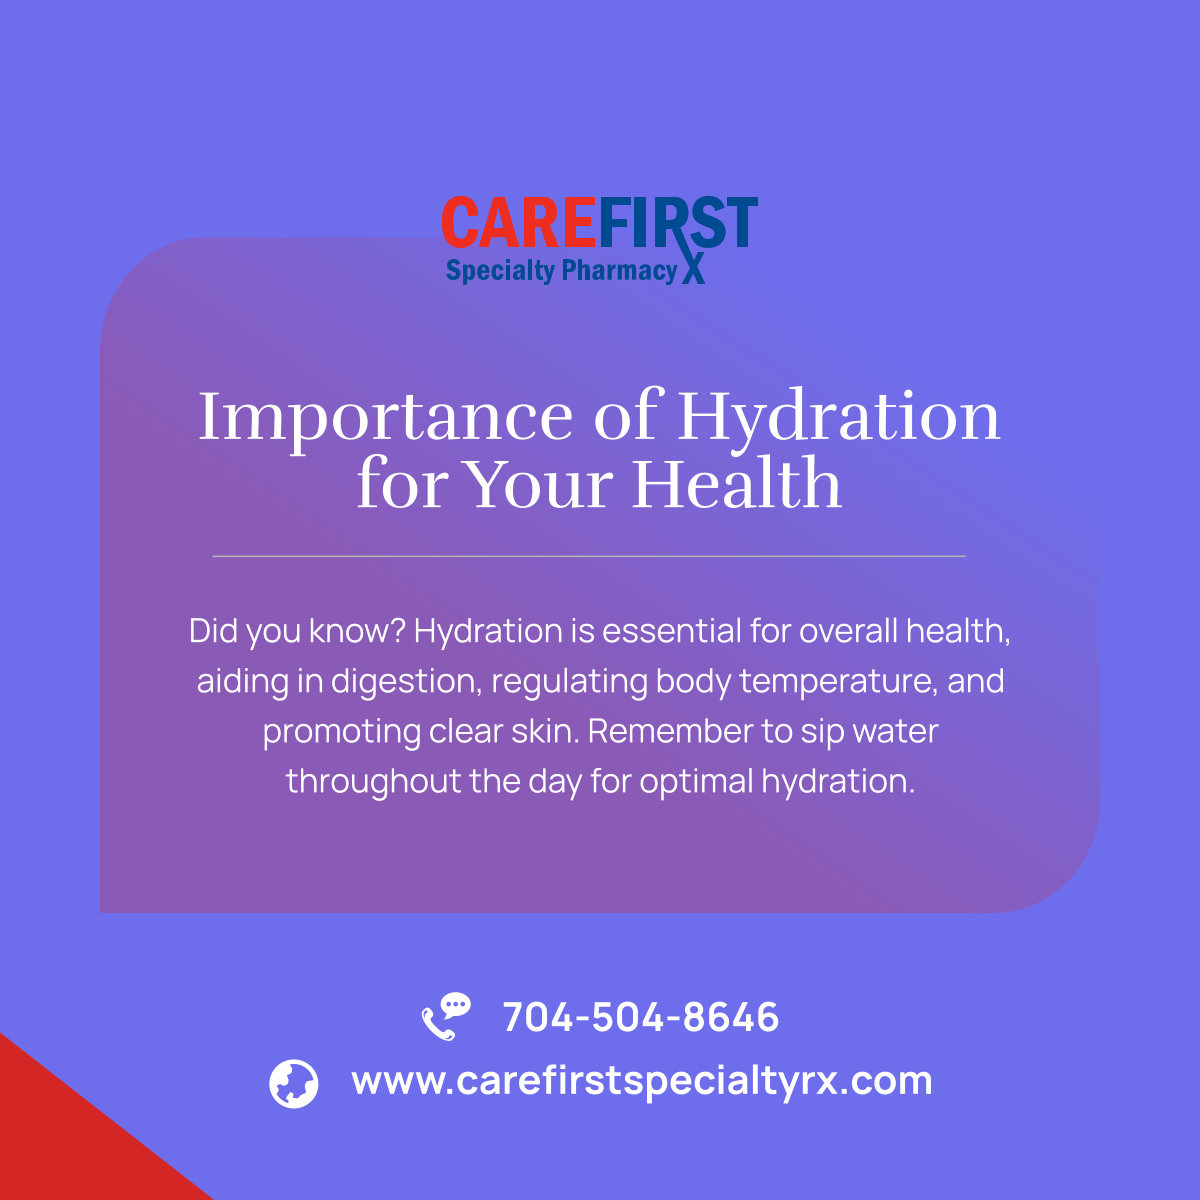 Staying hydrated is key to feeling your best! Keep your body happy and healthy by drinking enough water daily. 

#CharlotteNC #RetailPharmacy #HydrationTips #WellnessWednesday #HealthyLiving